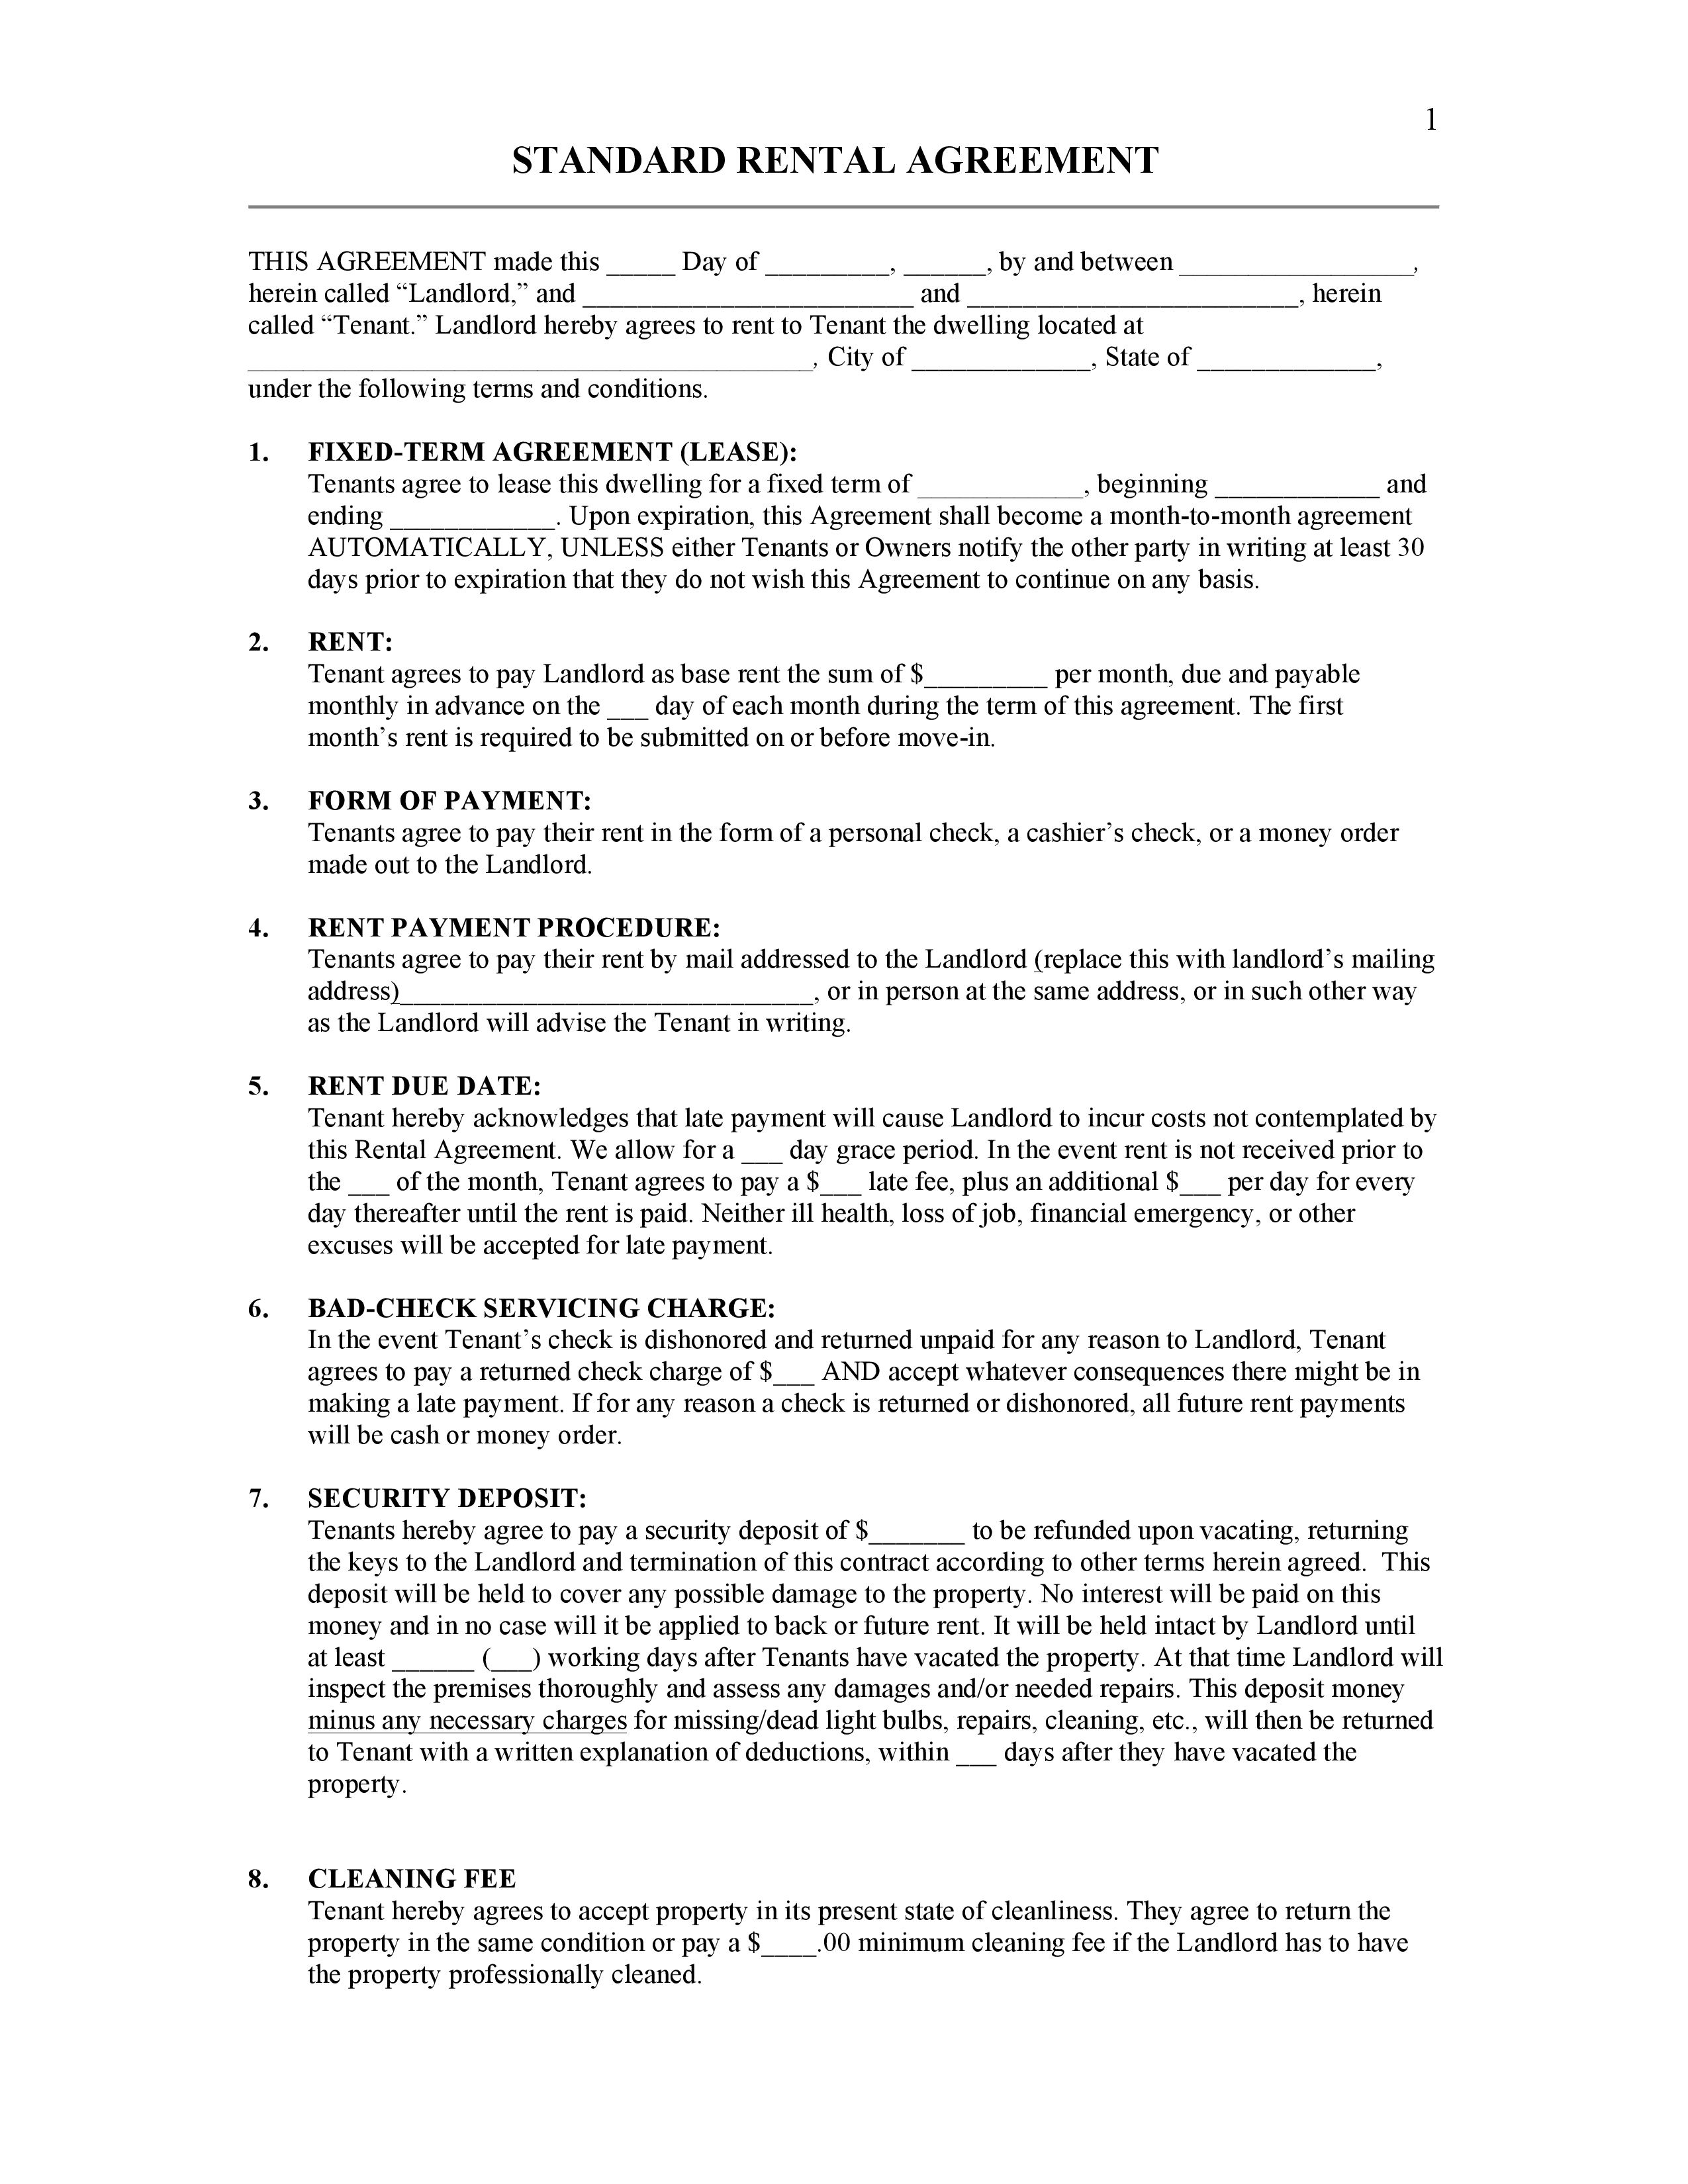 Free Rental Lease Agreement Form Download Free Rental Lease Agreement Forms Form Download